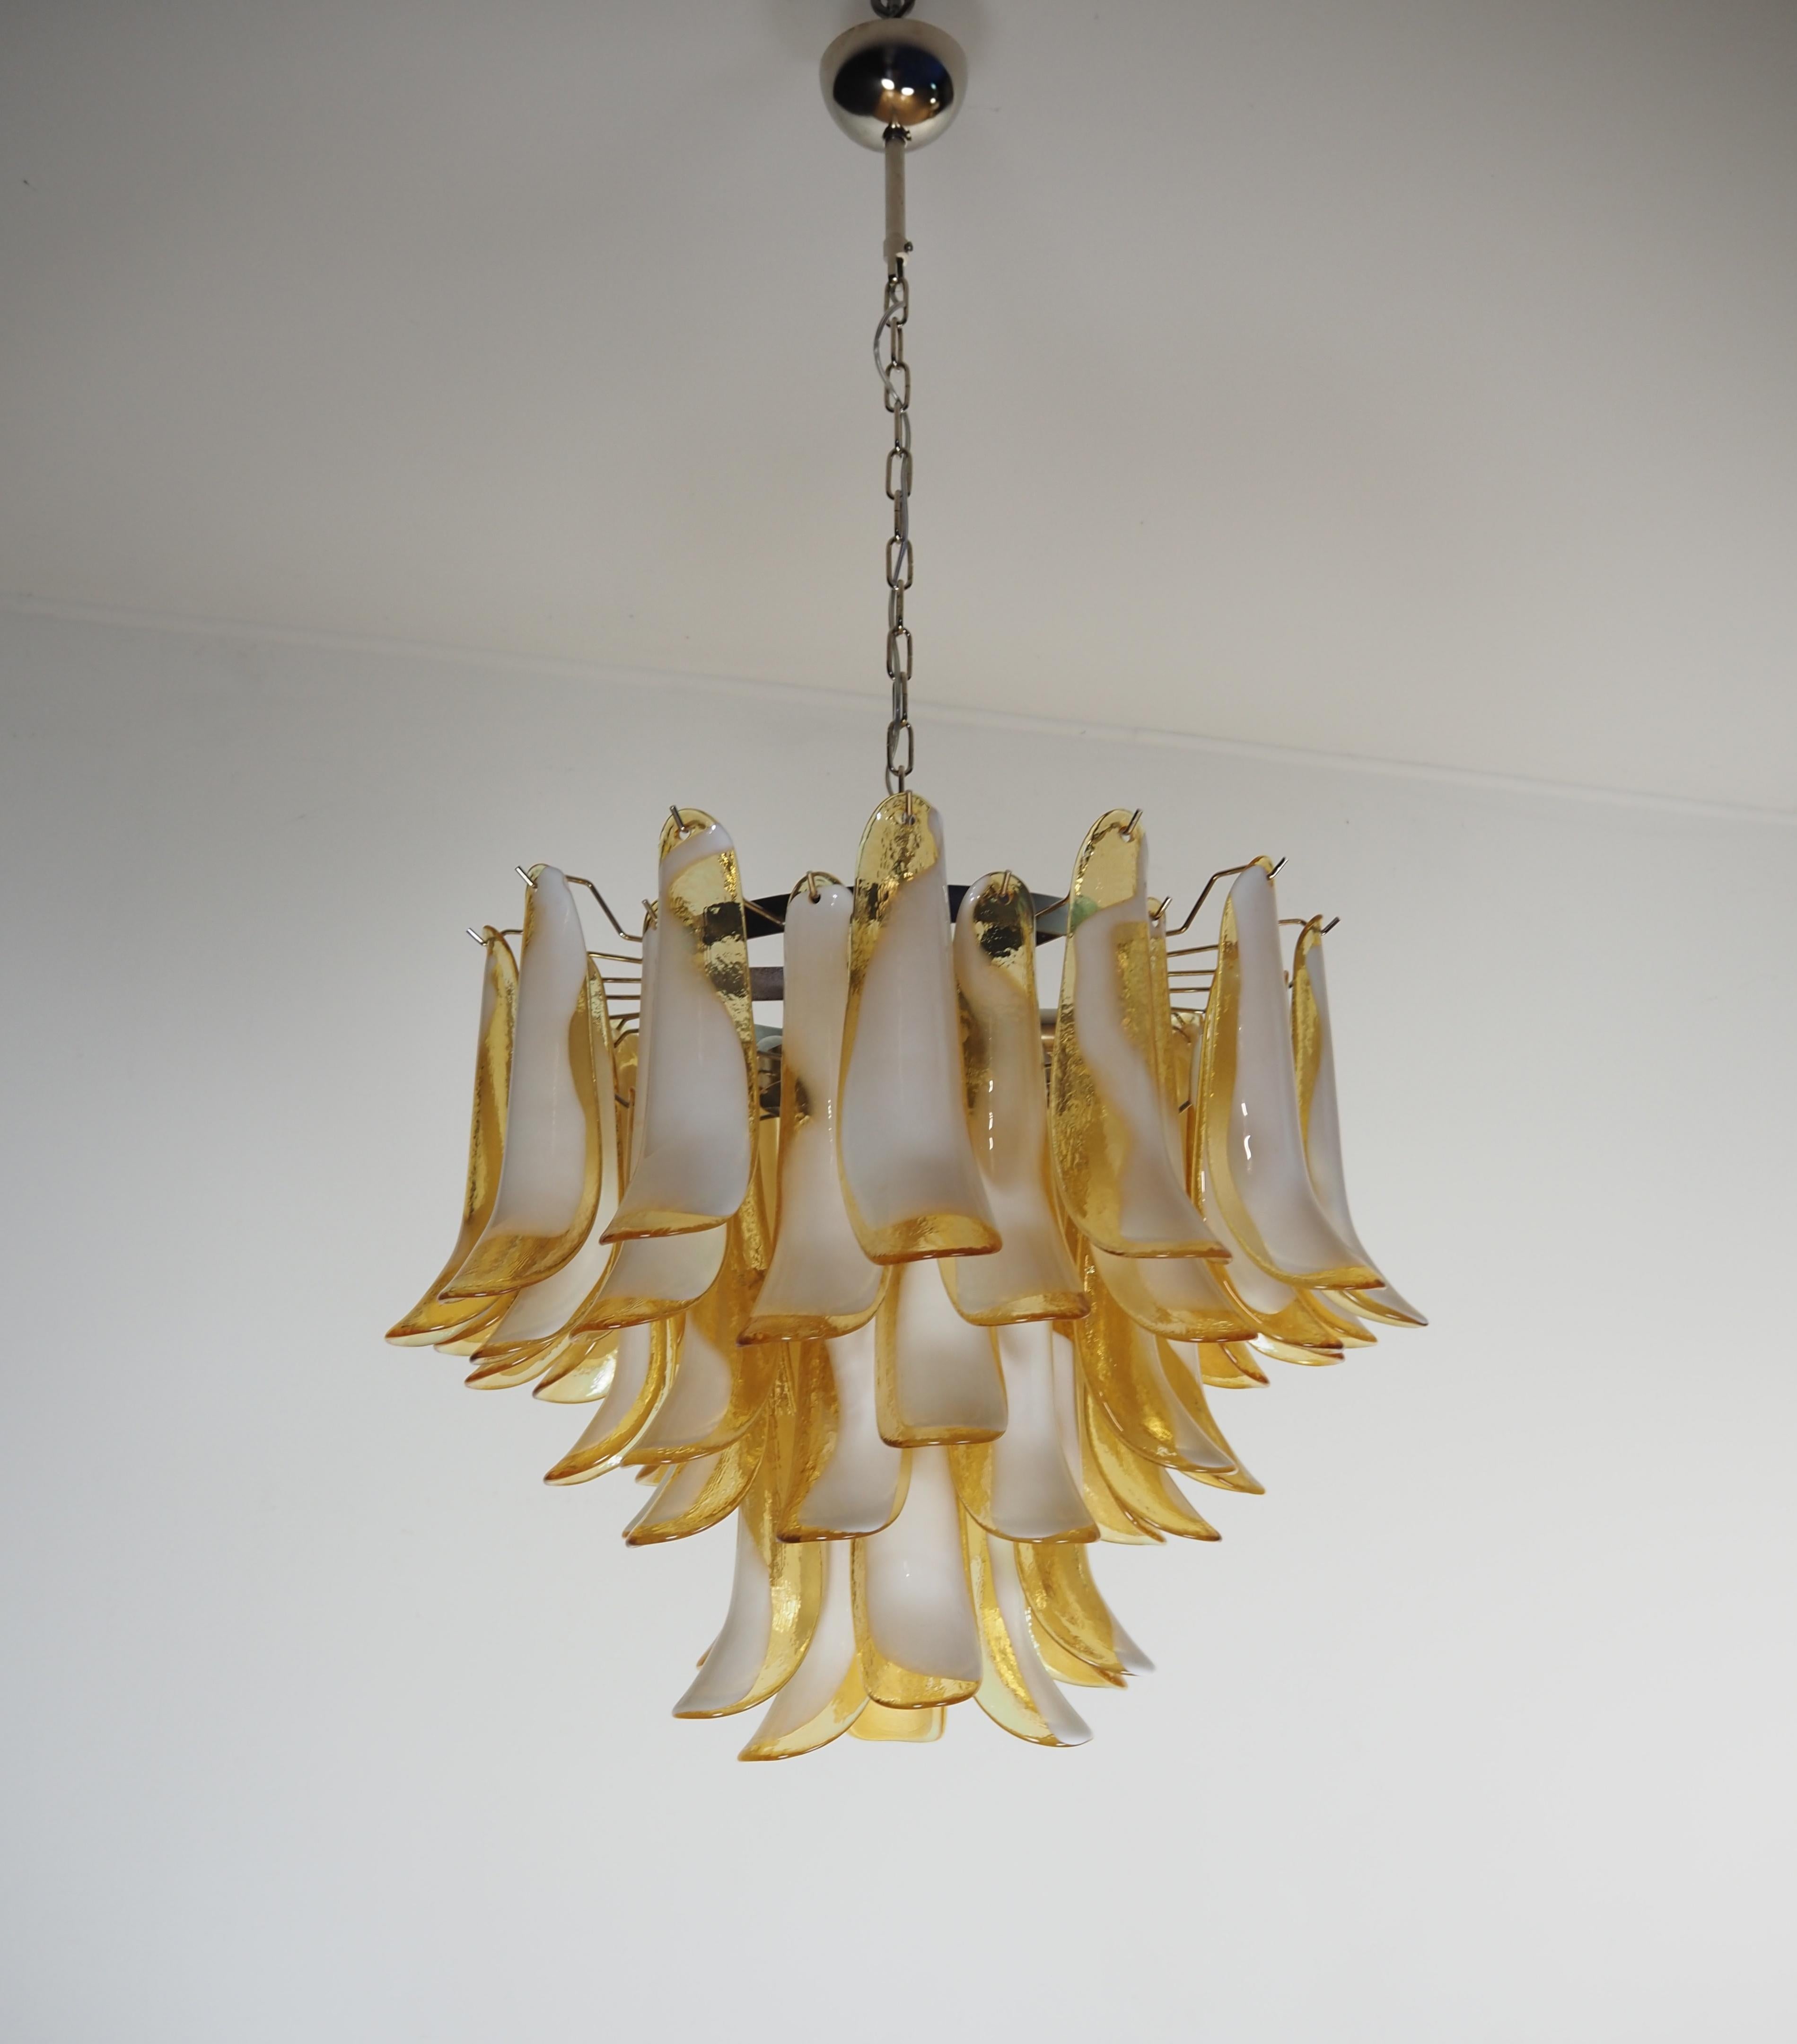 Murano Italian glass chandelier. Fantastic chandelier with caramel and white 